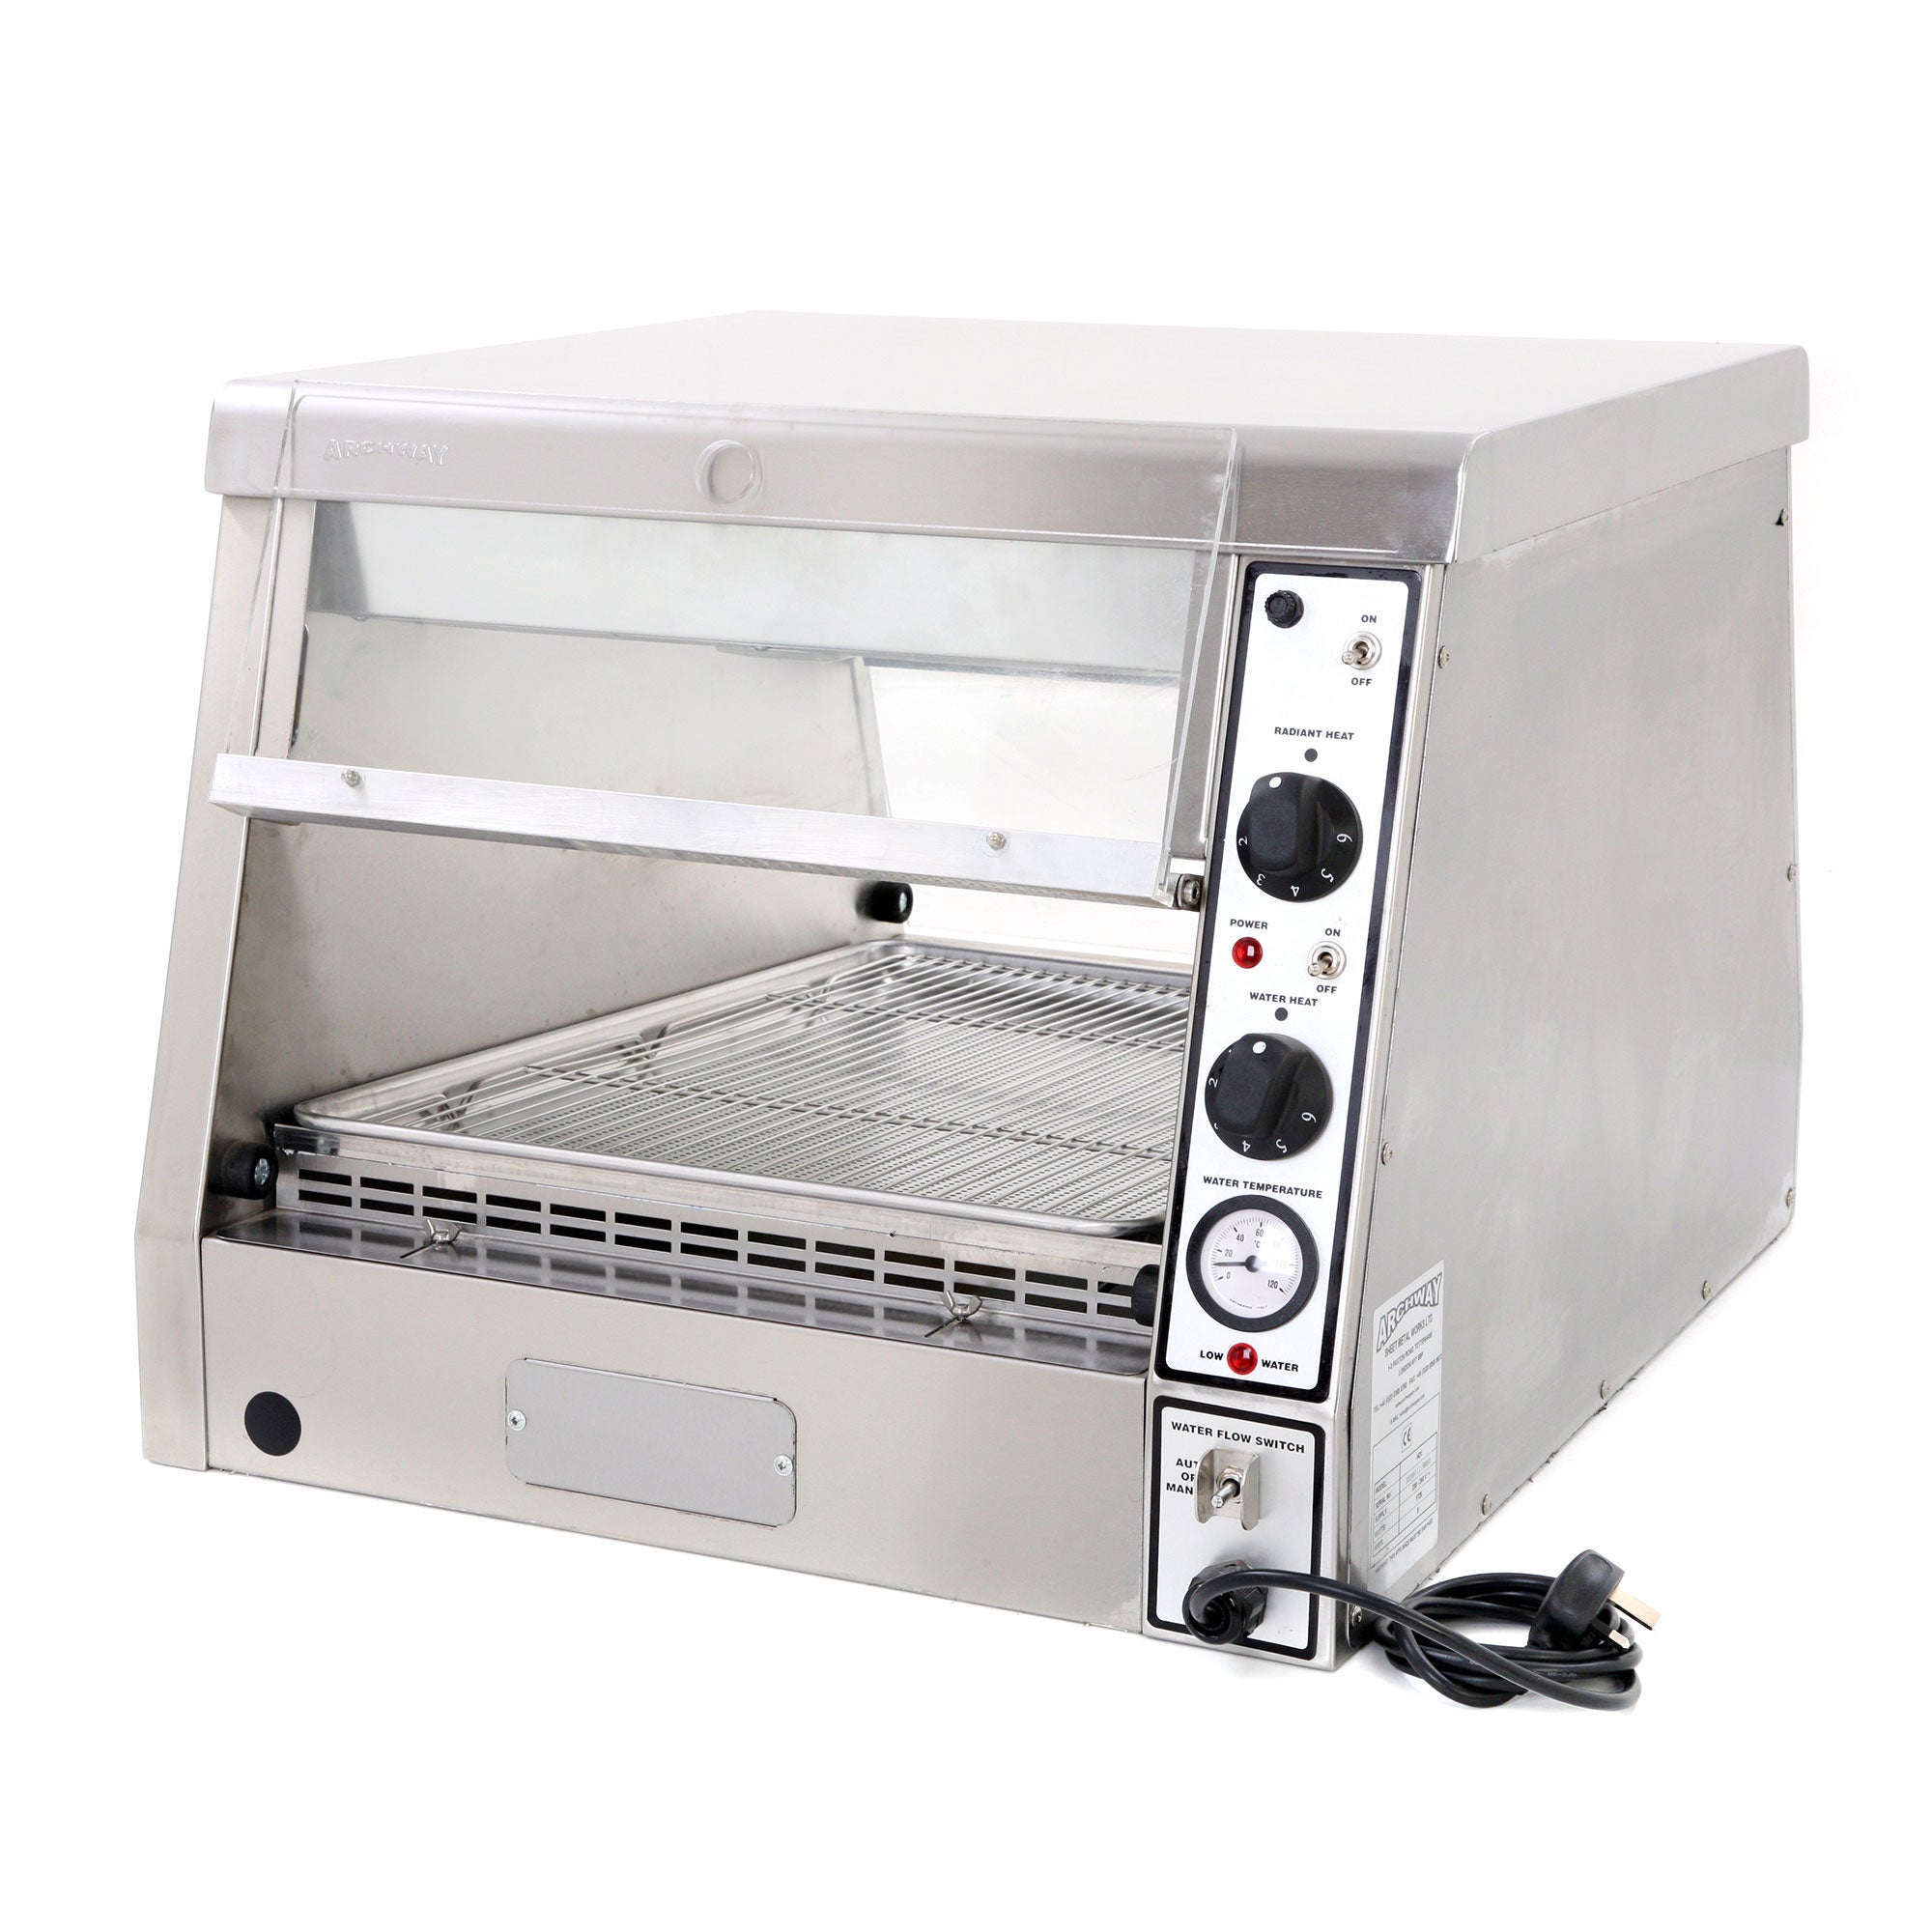 ARCHWAY Heated Chicken Display – 1 Pan.Product ref:00448.MODEL:HD1.🚚 4-6 Weeks Delivery